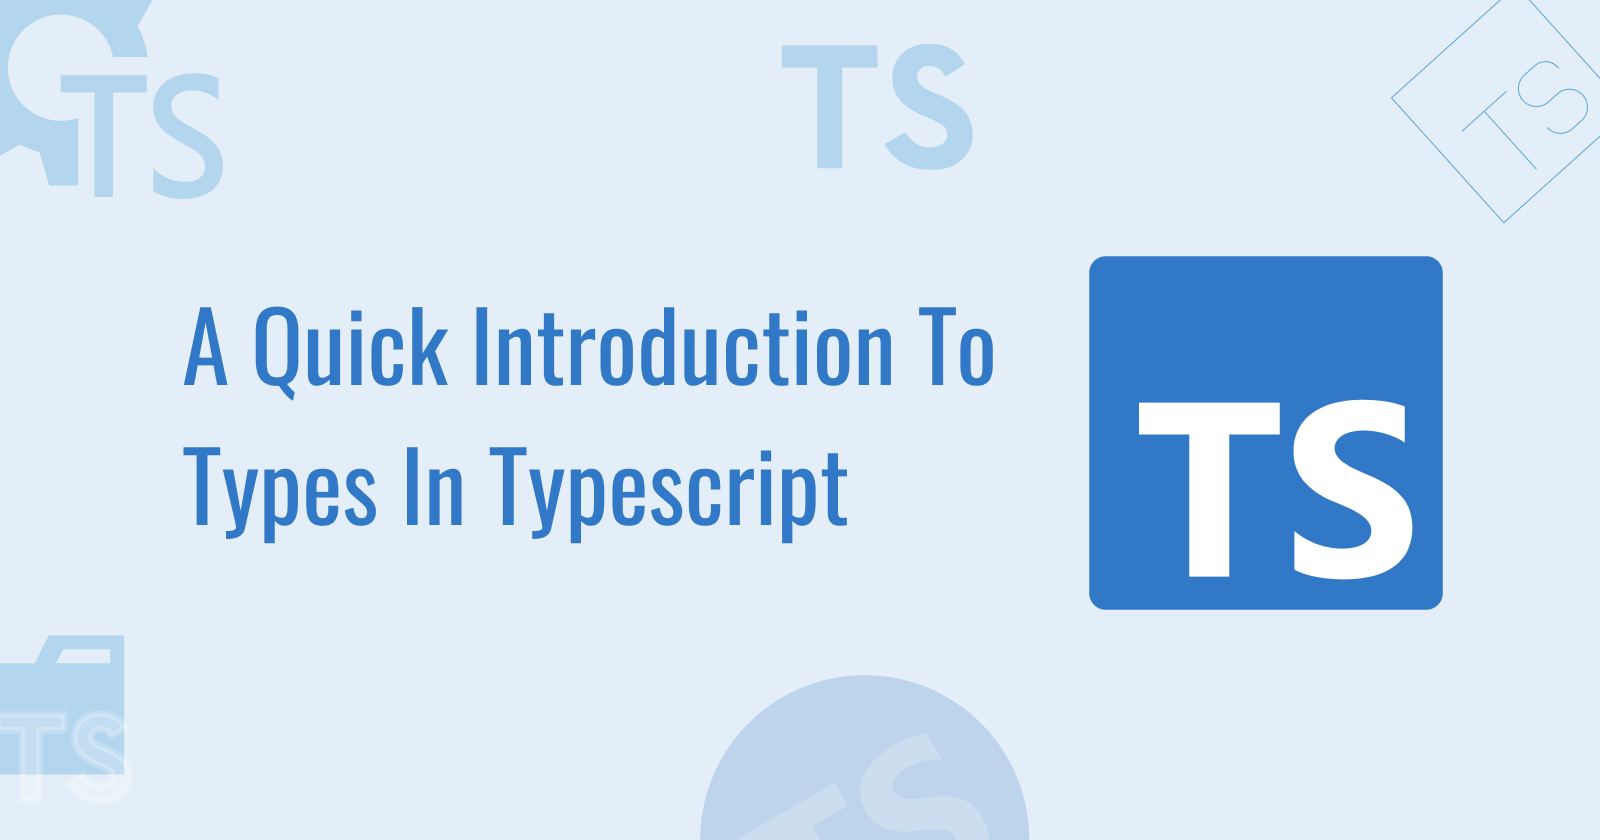 A Quick Introduction To Types In TypeScript